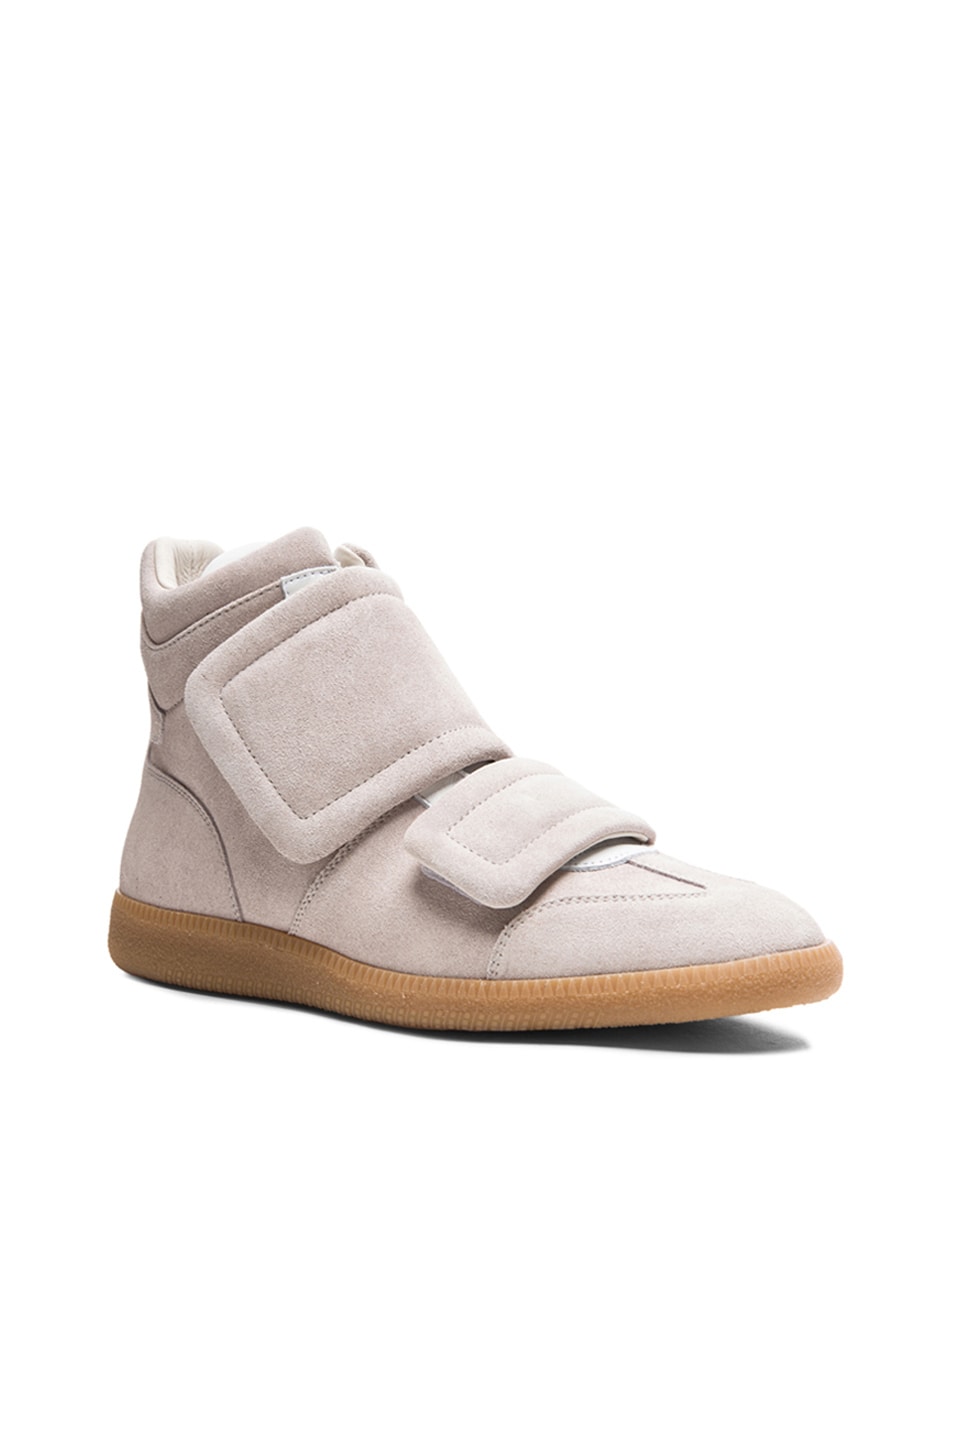 Image 1 of Maison Margiela Clinic Suede High Tops in Off White